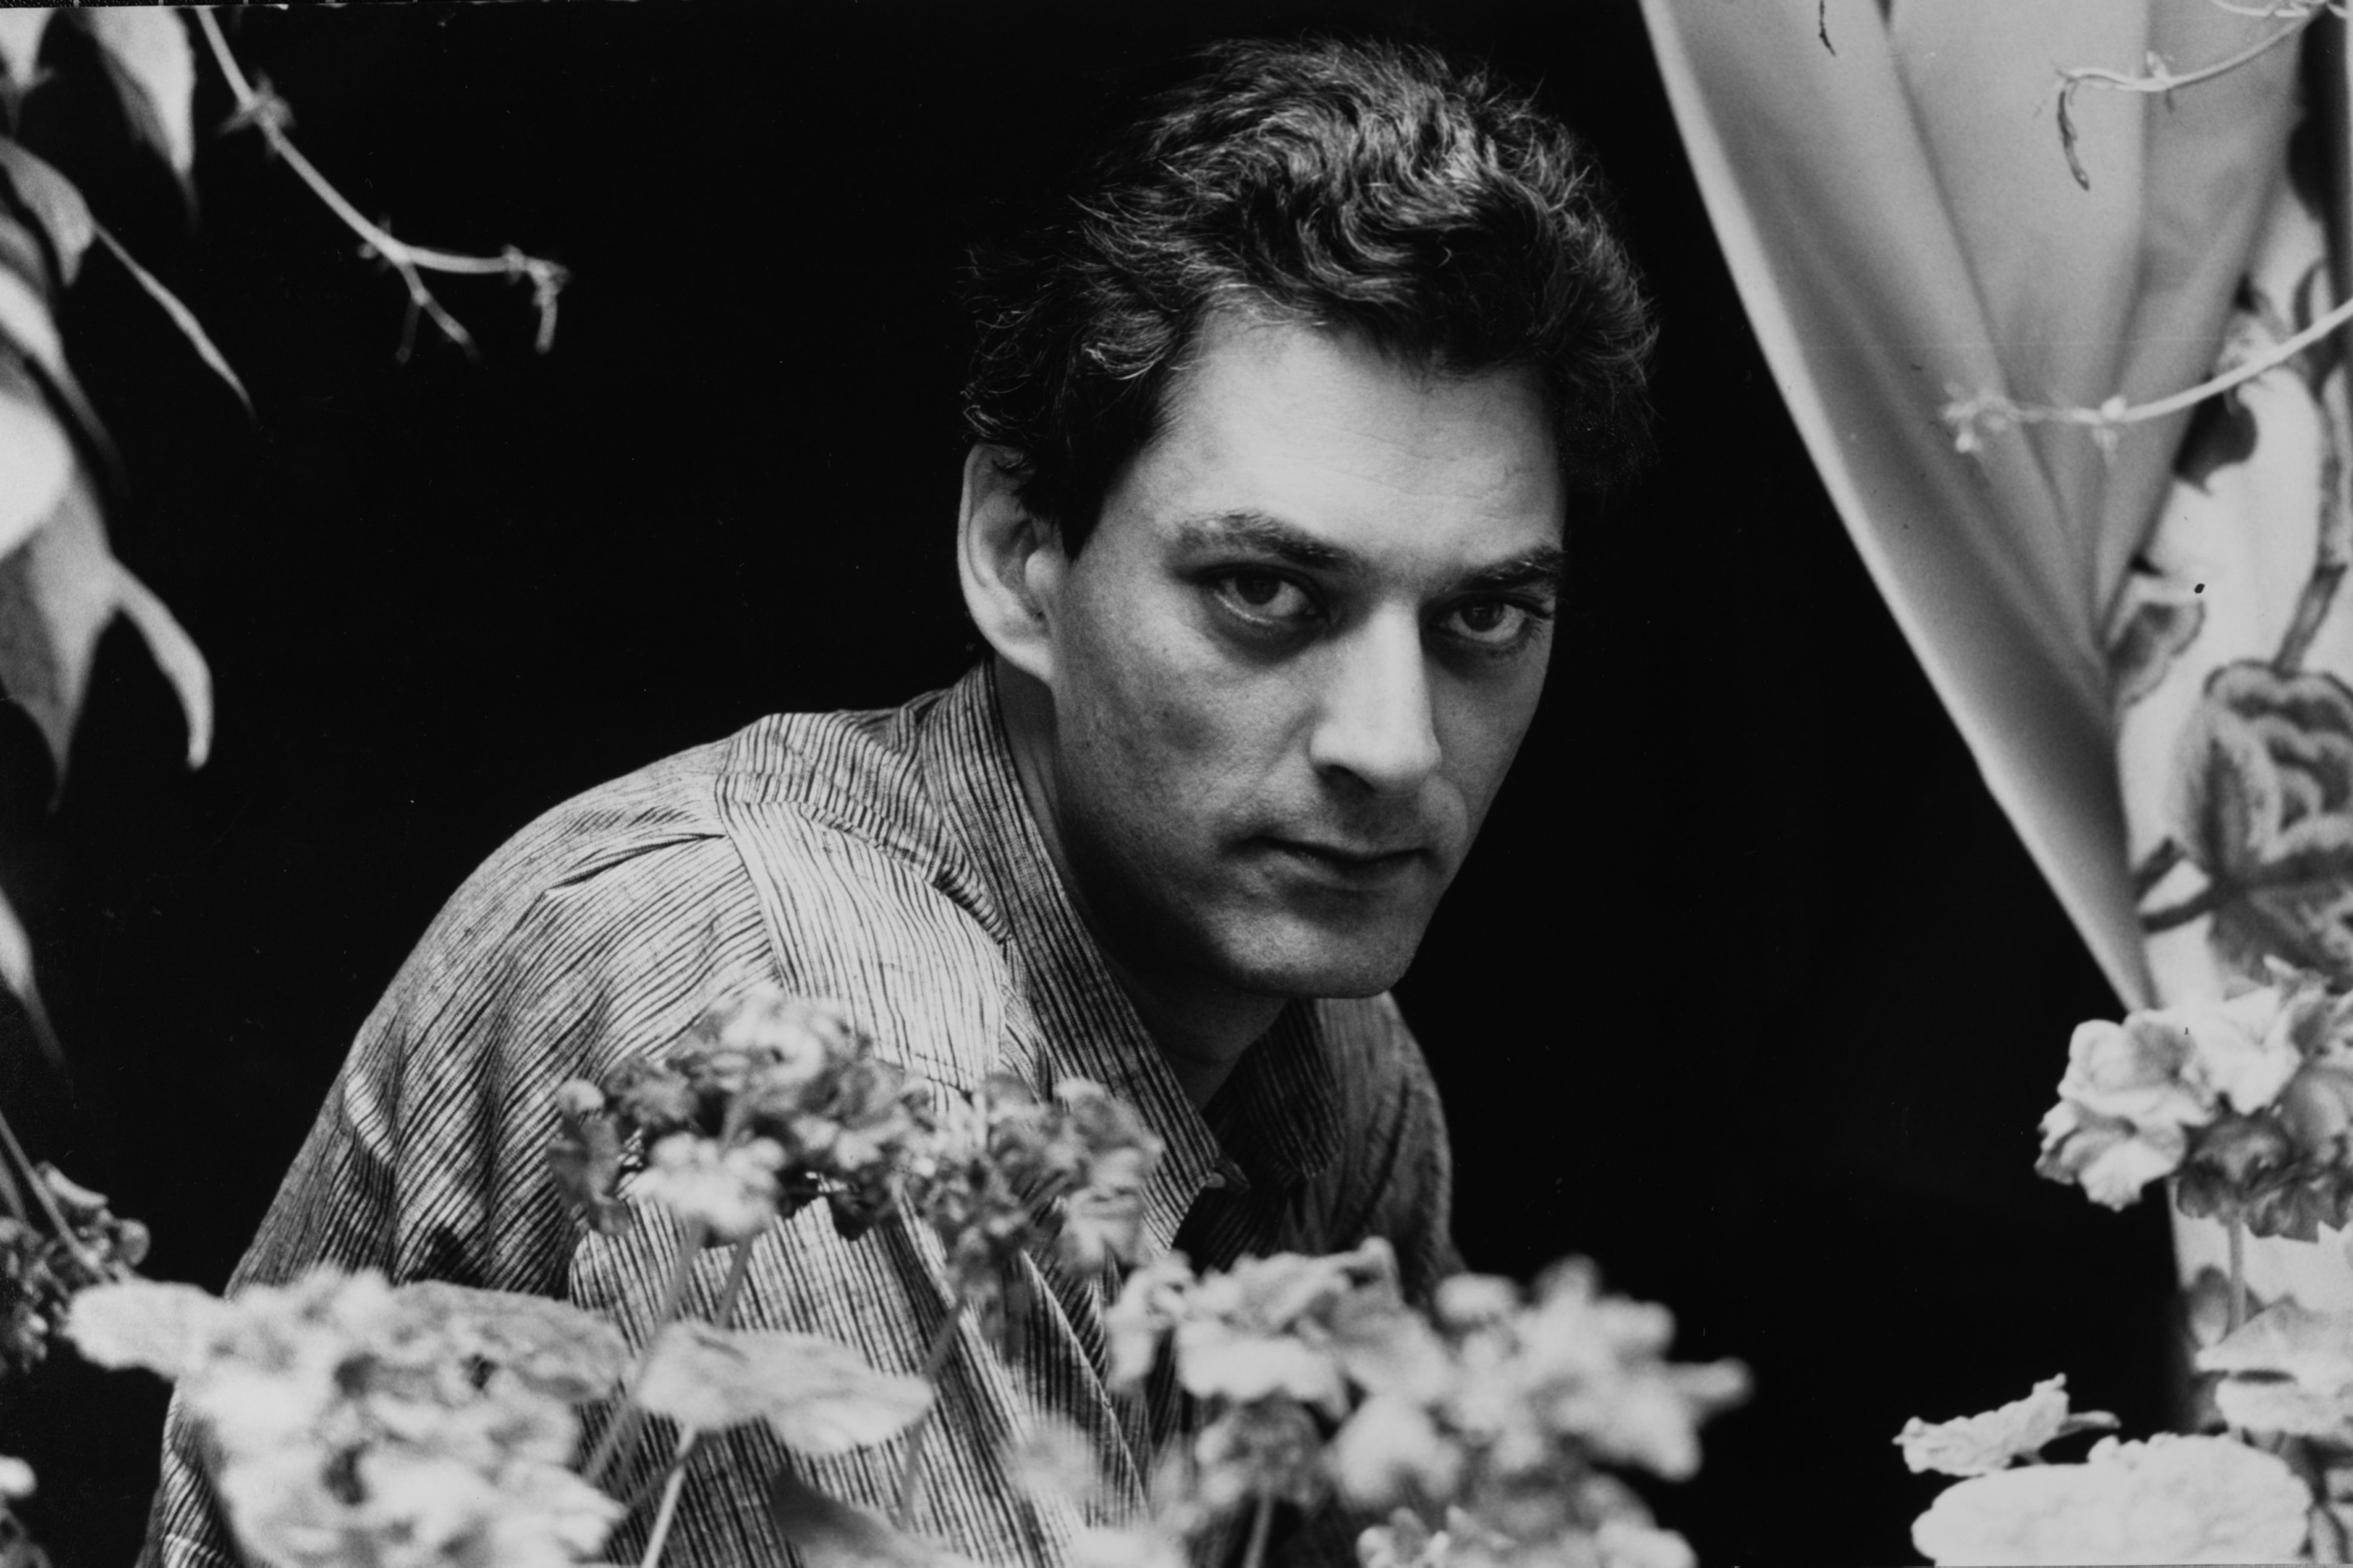 Paul Auster escaped death by seconds at the age of 14, an experience that shaped his work